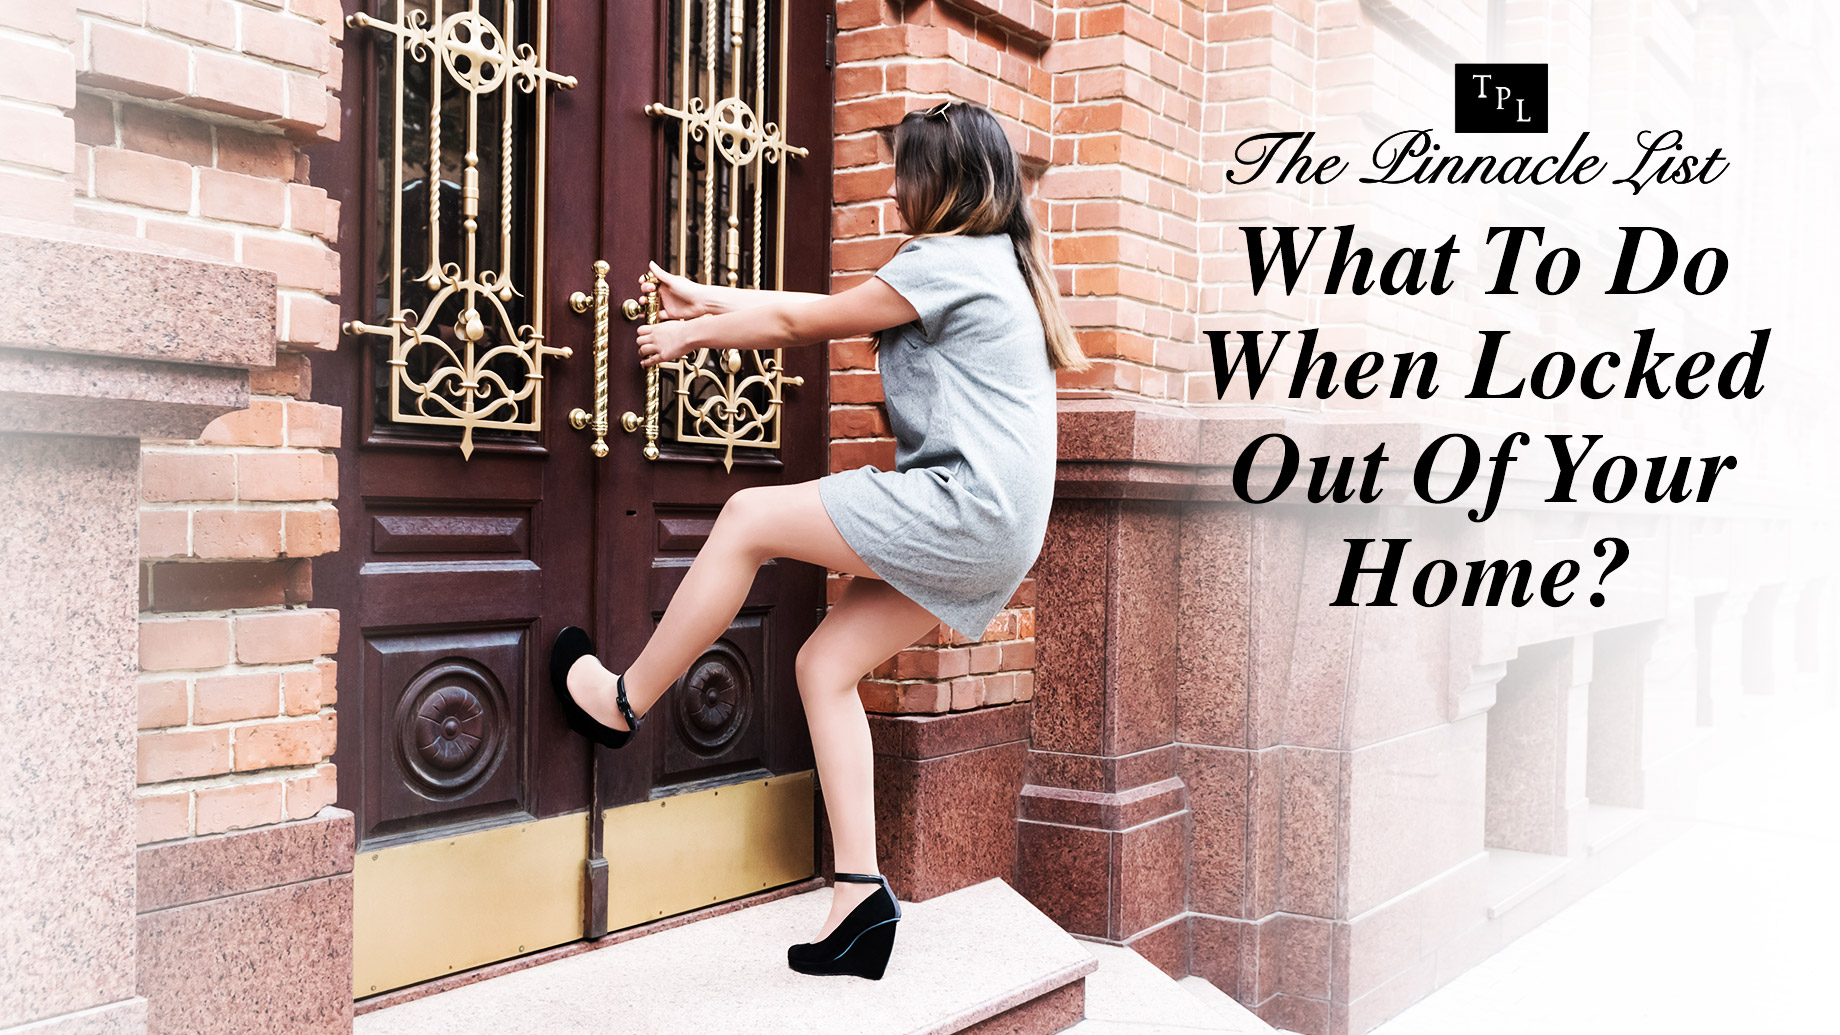 What To Do When Locked Out Of Your House?